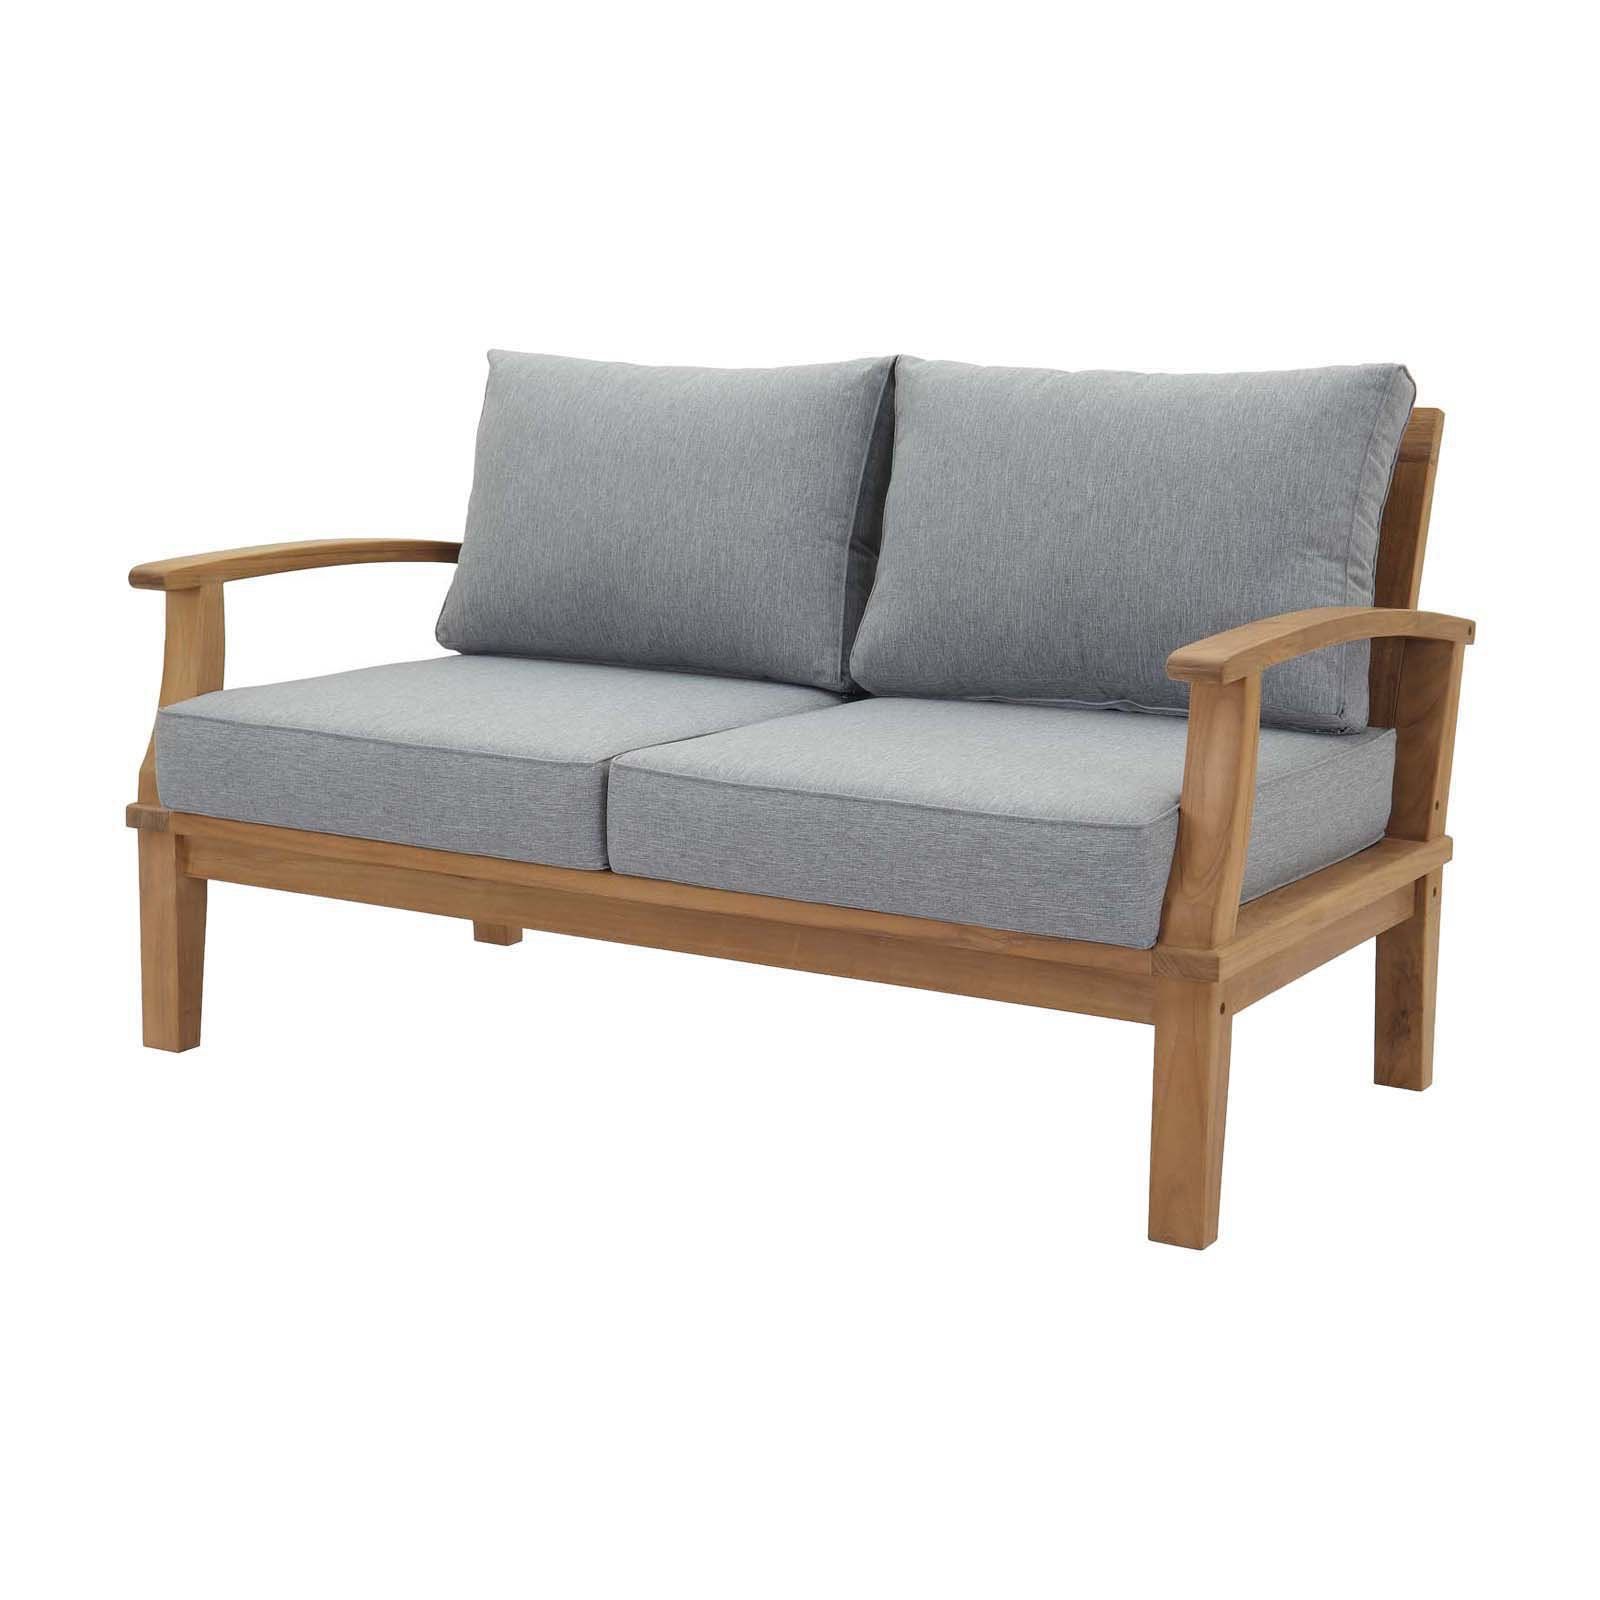 Newest Modway Marina Outdoor Patio Loveseat White (View 13 of 20)